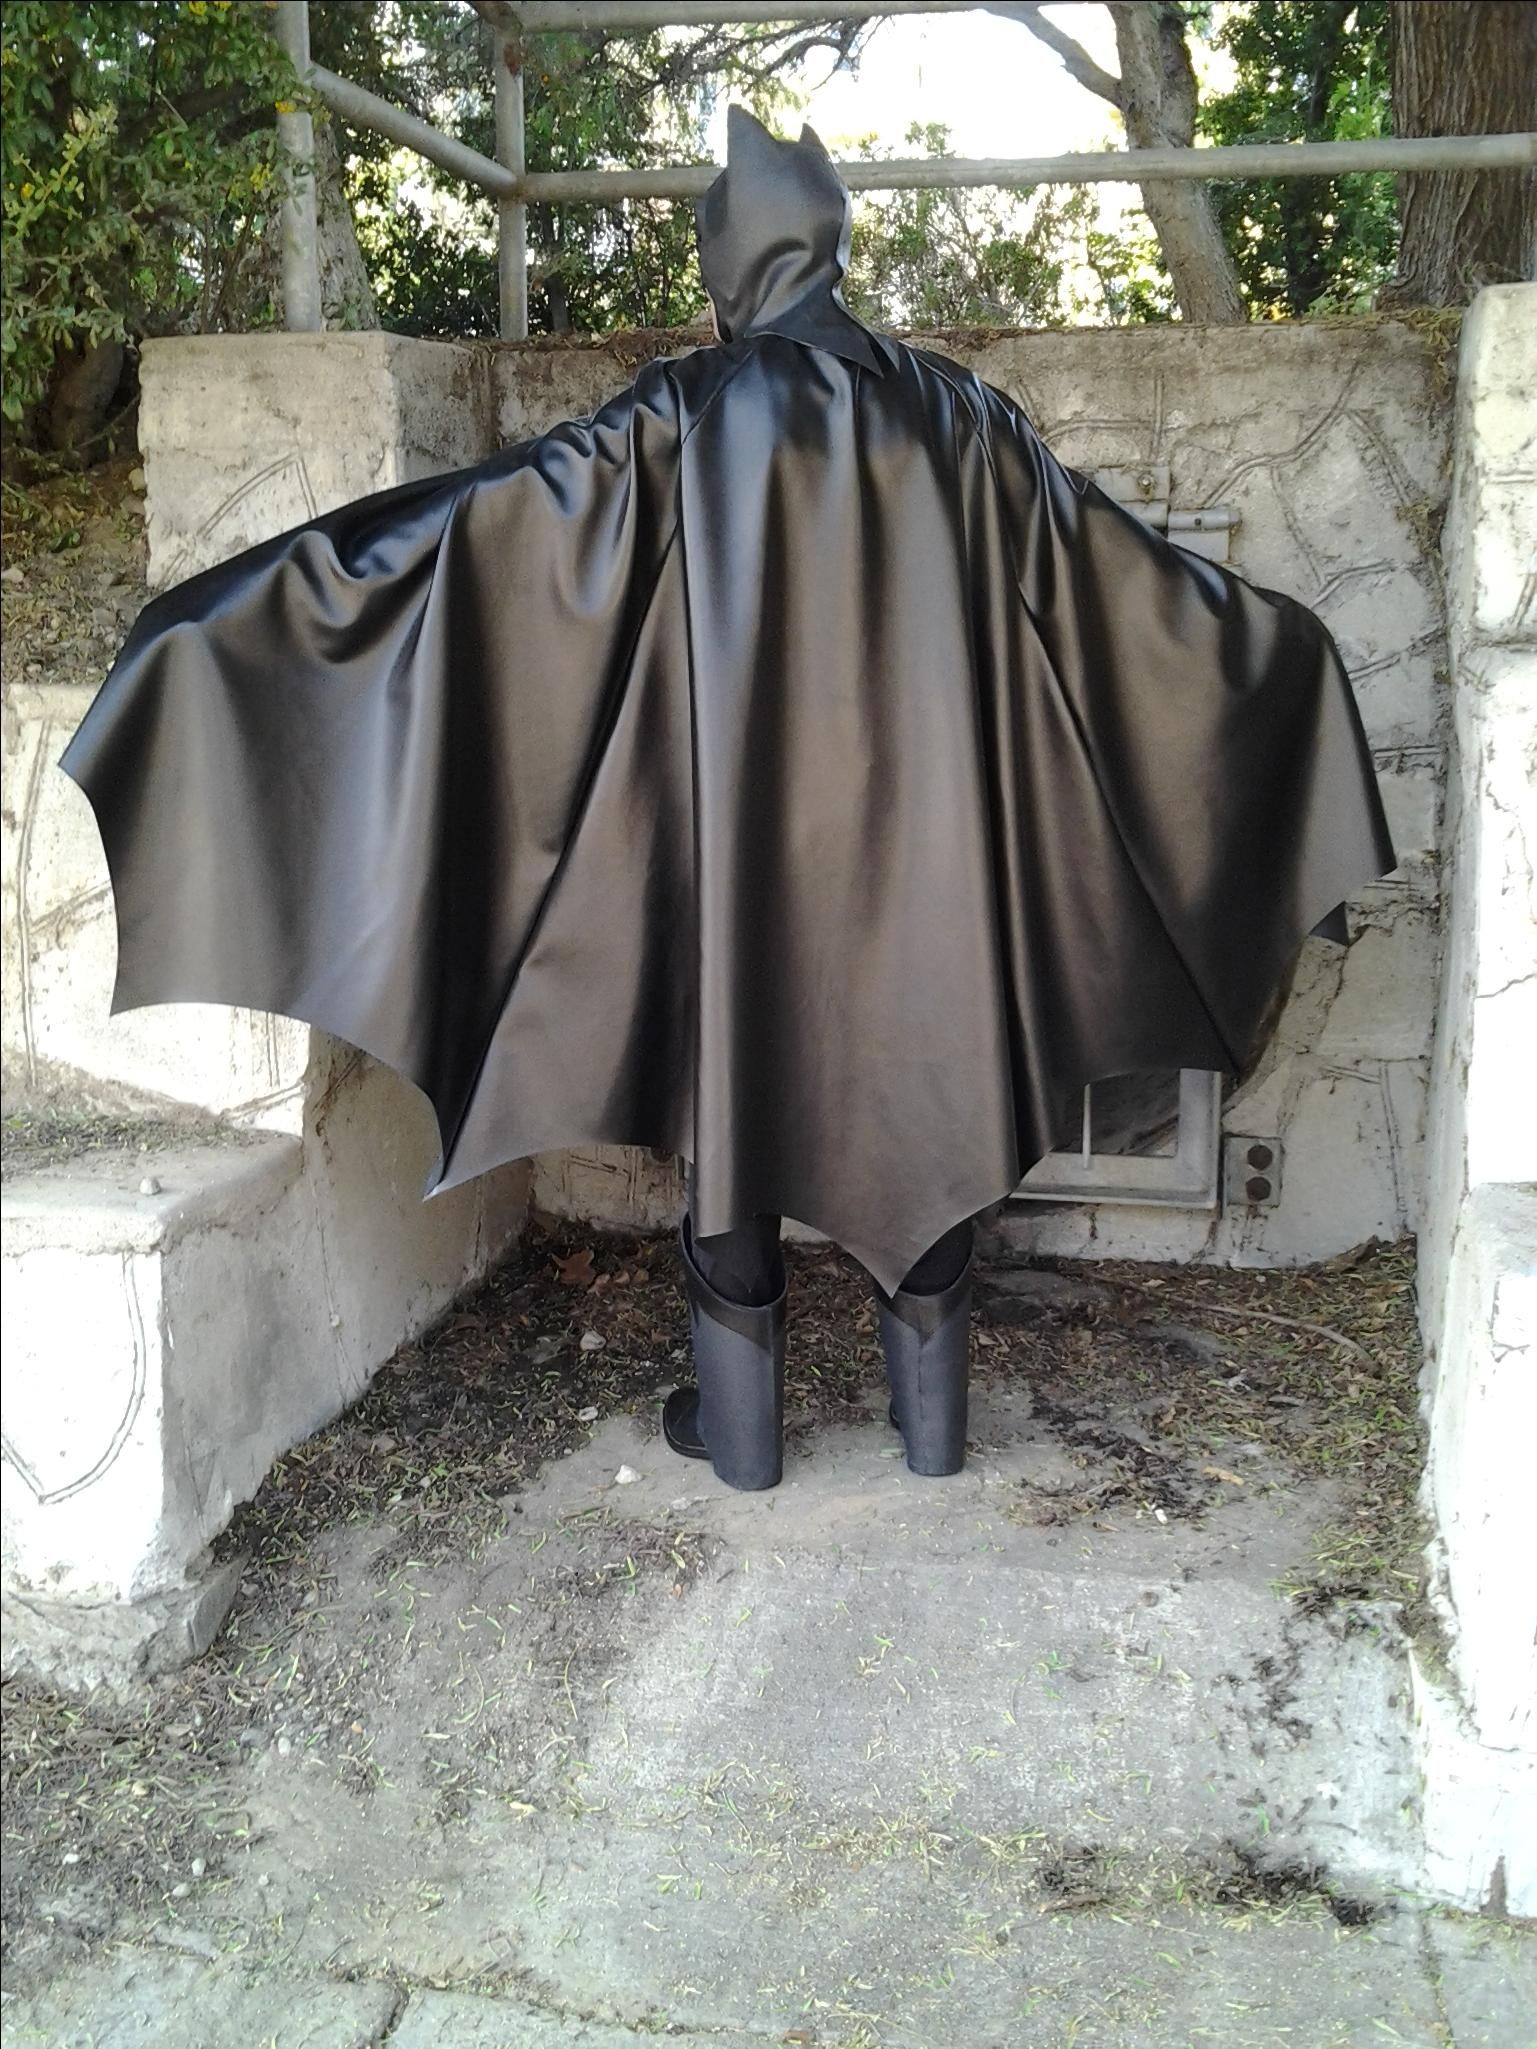 Buy Custom Batman Cape, made to order from Hollywood Magic Capes